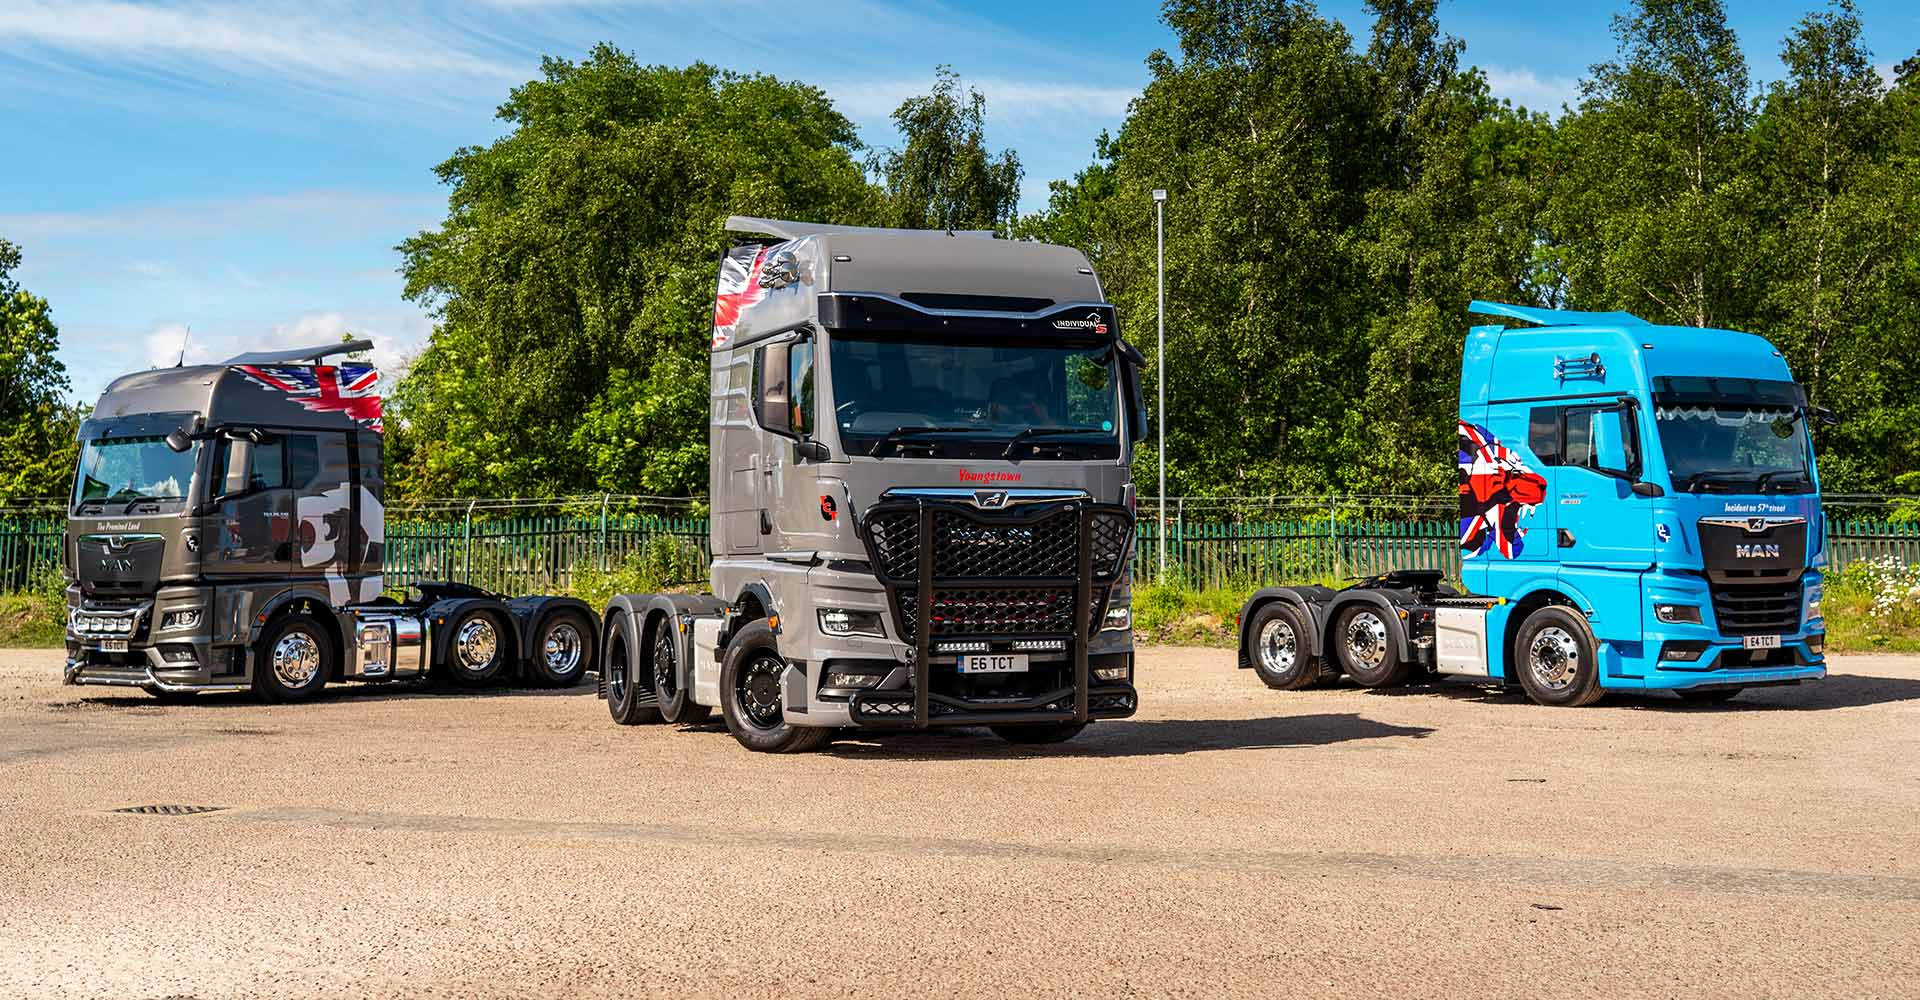 A song of praise for the new MAN TGX generation